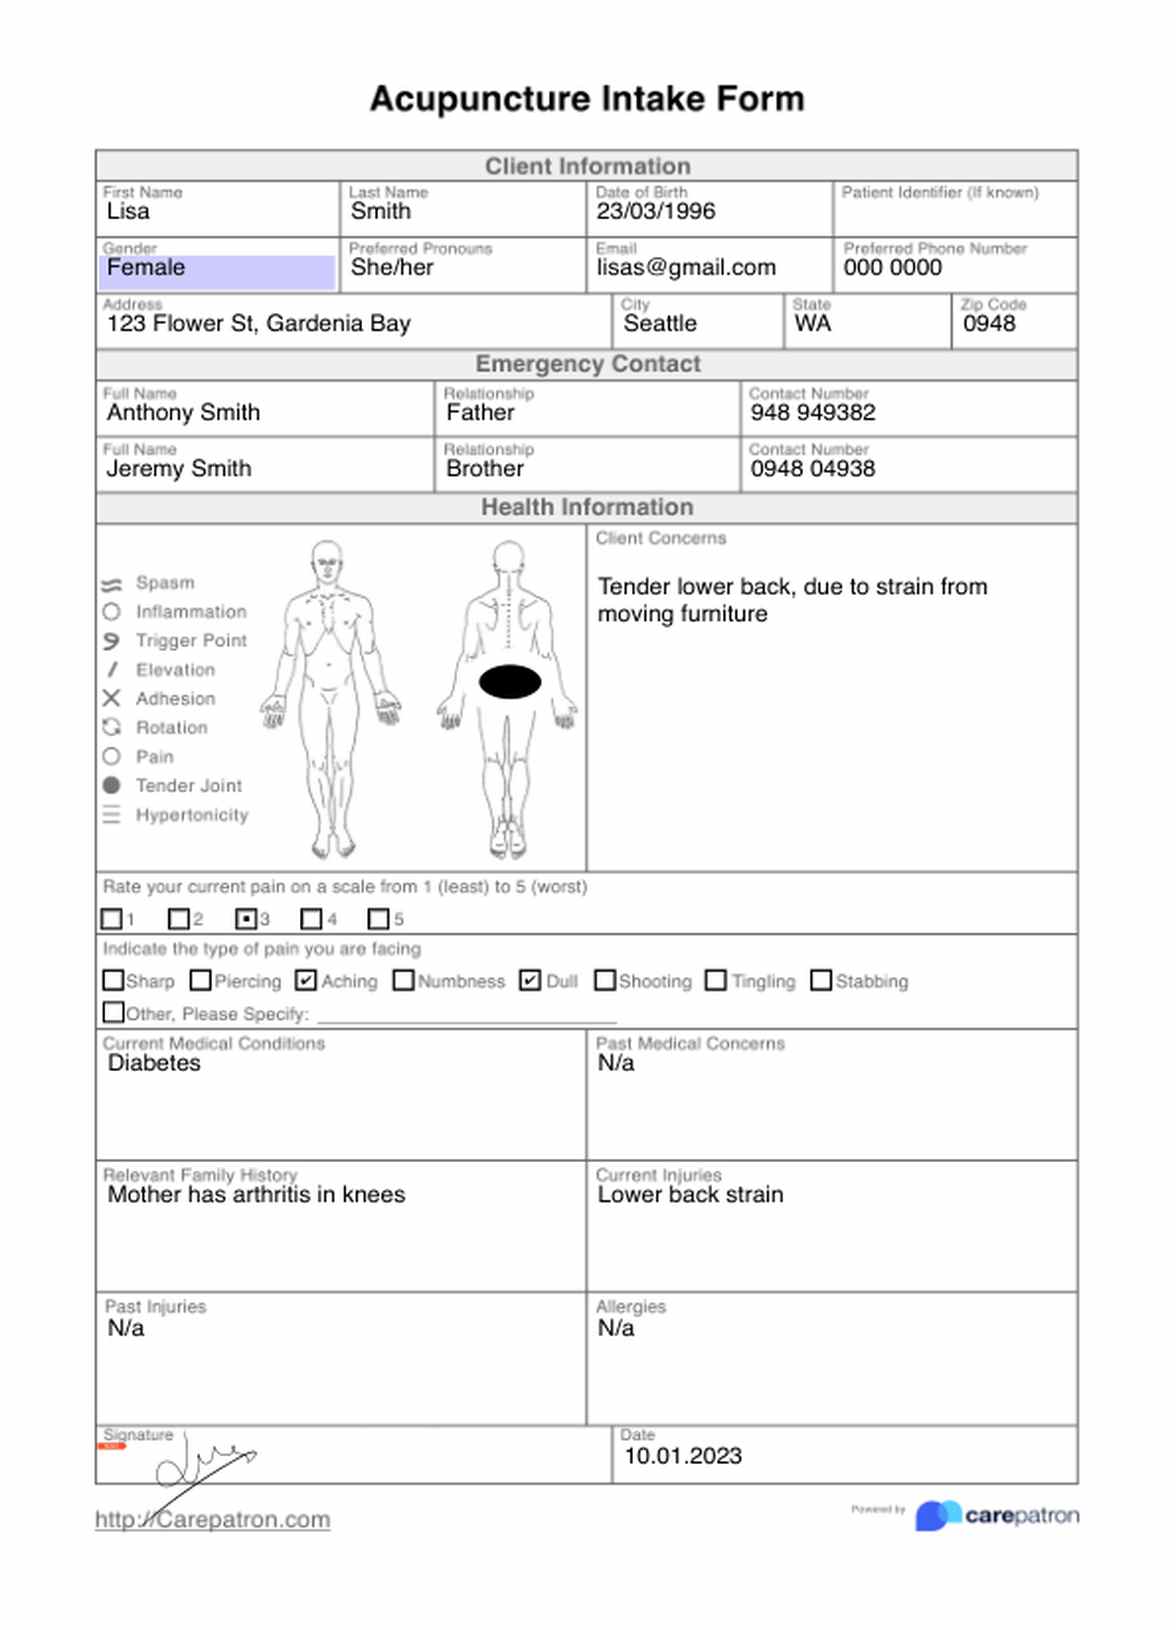 Acupuncture Intake Form PDF Example